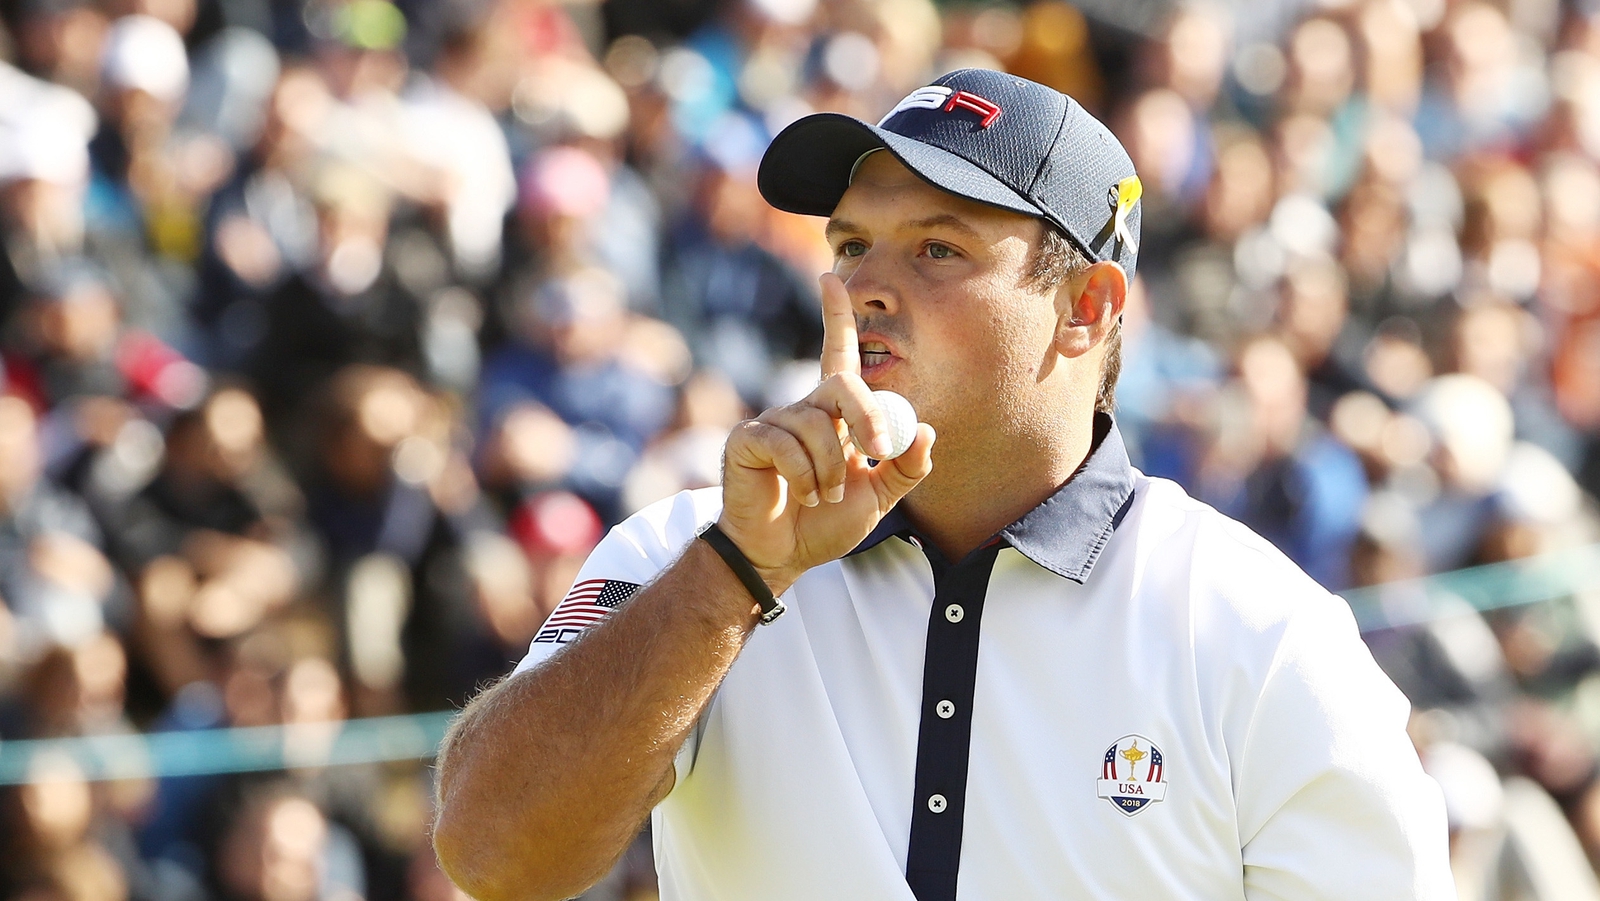 Reed slams US teammate Spieth after Ryder Cup snub